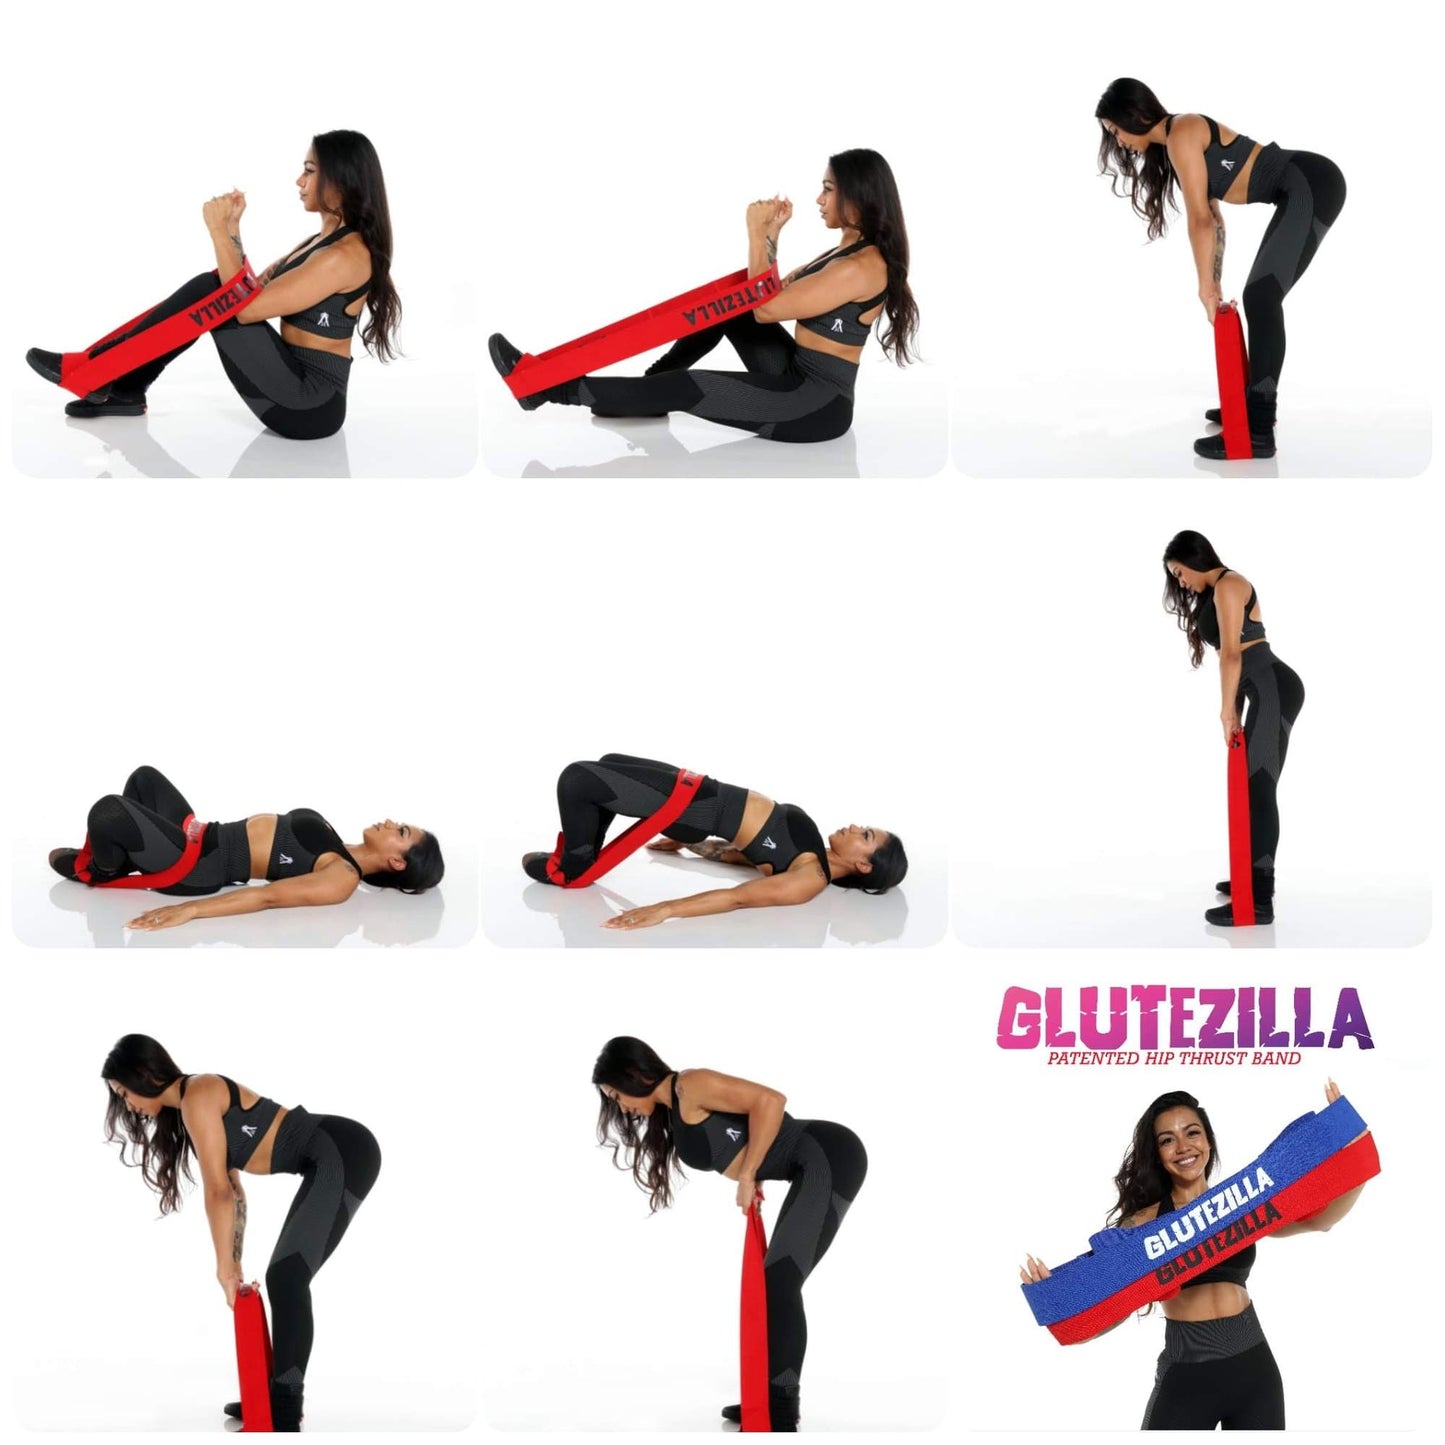 see all you can do with glutezilla